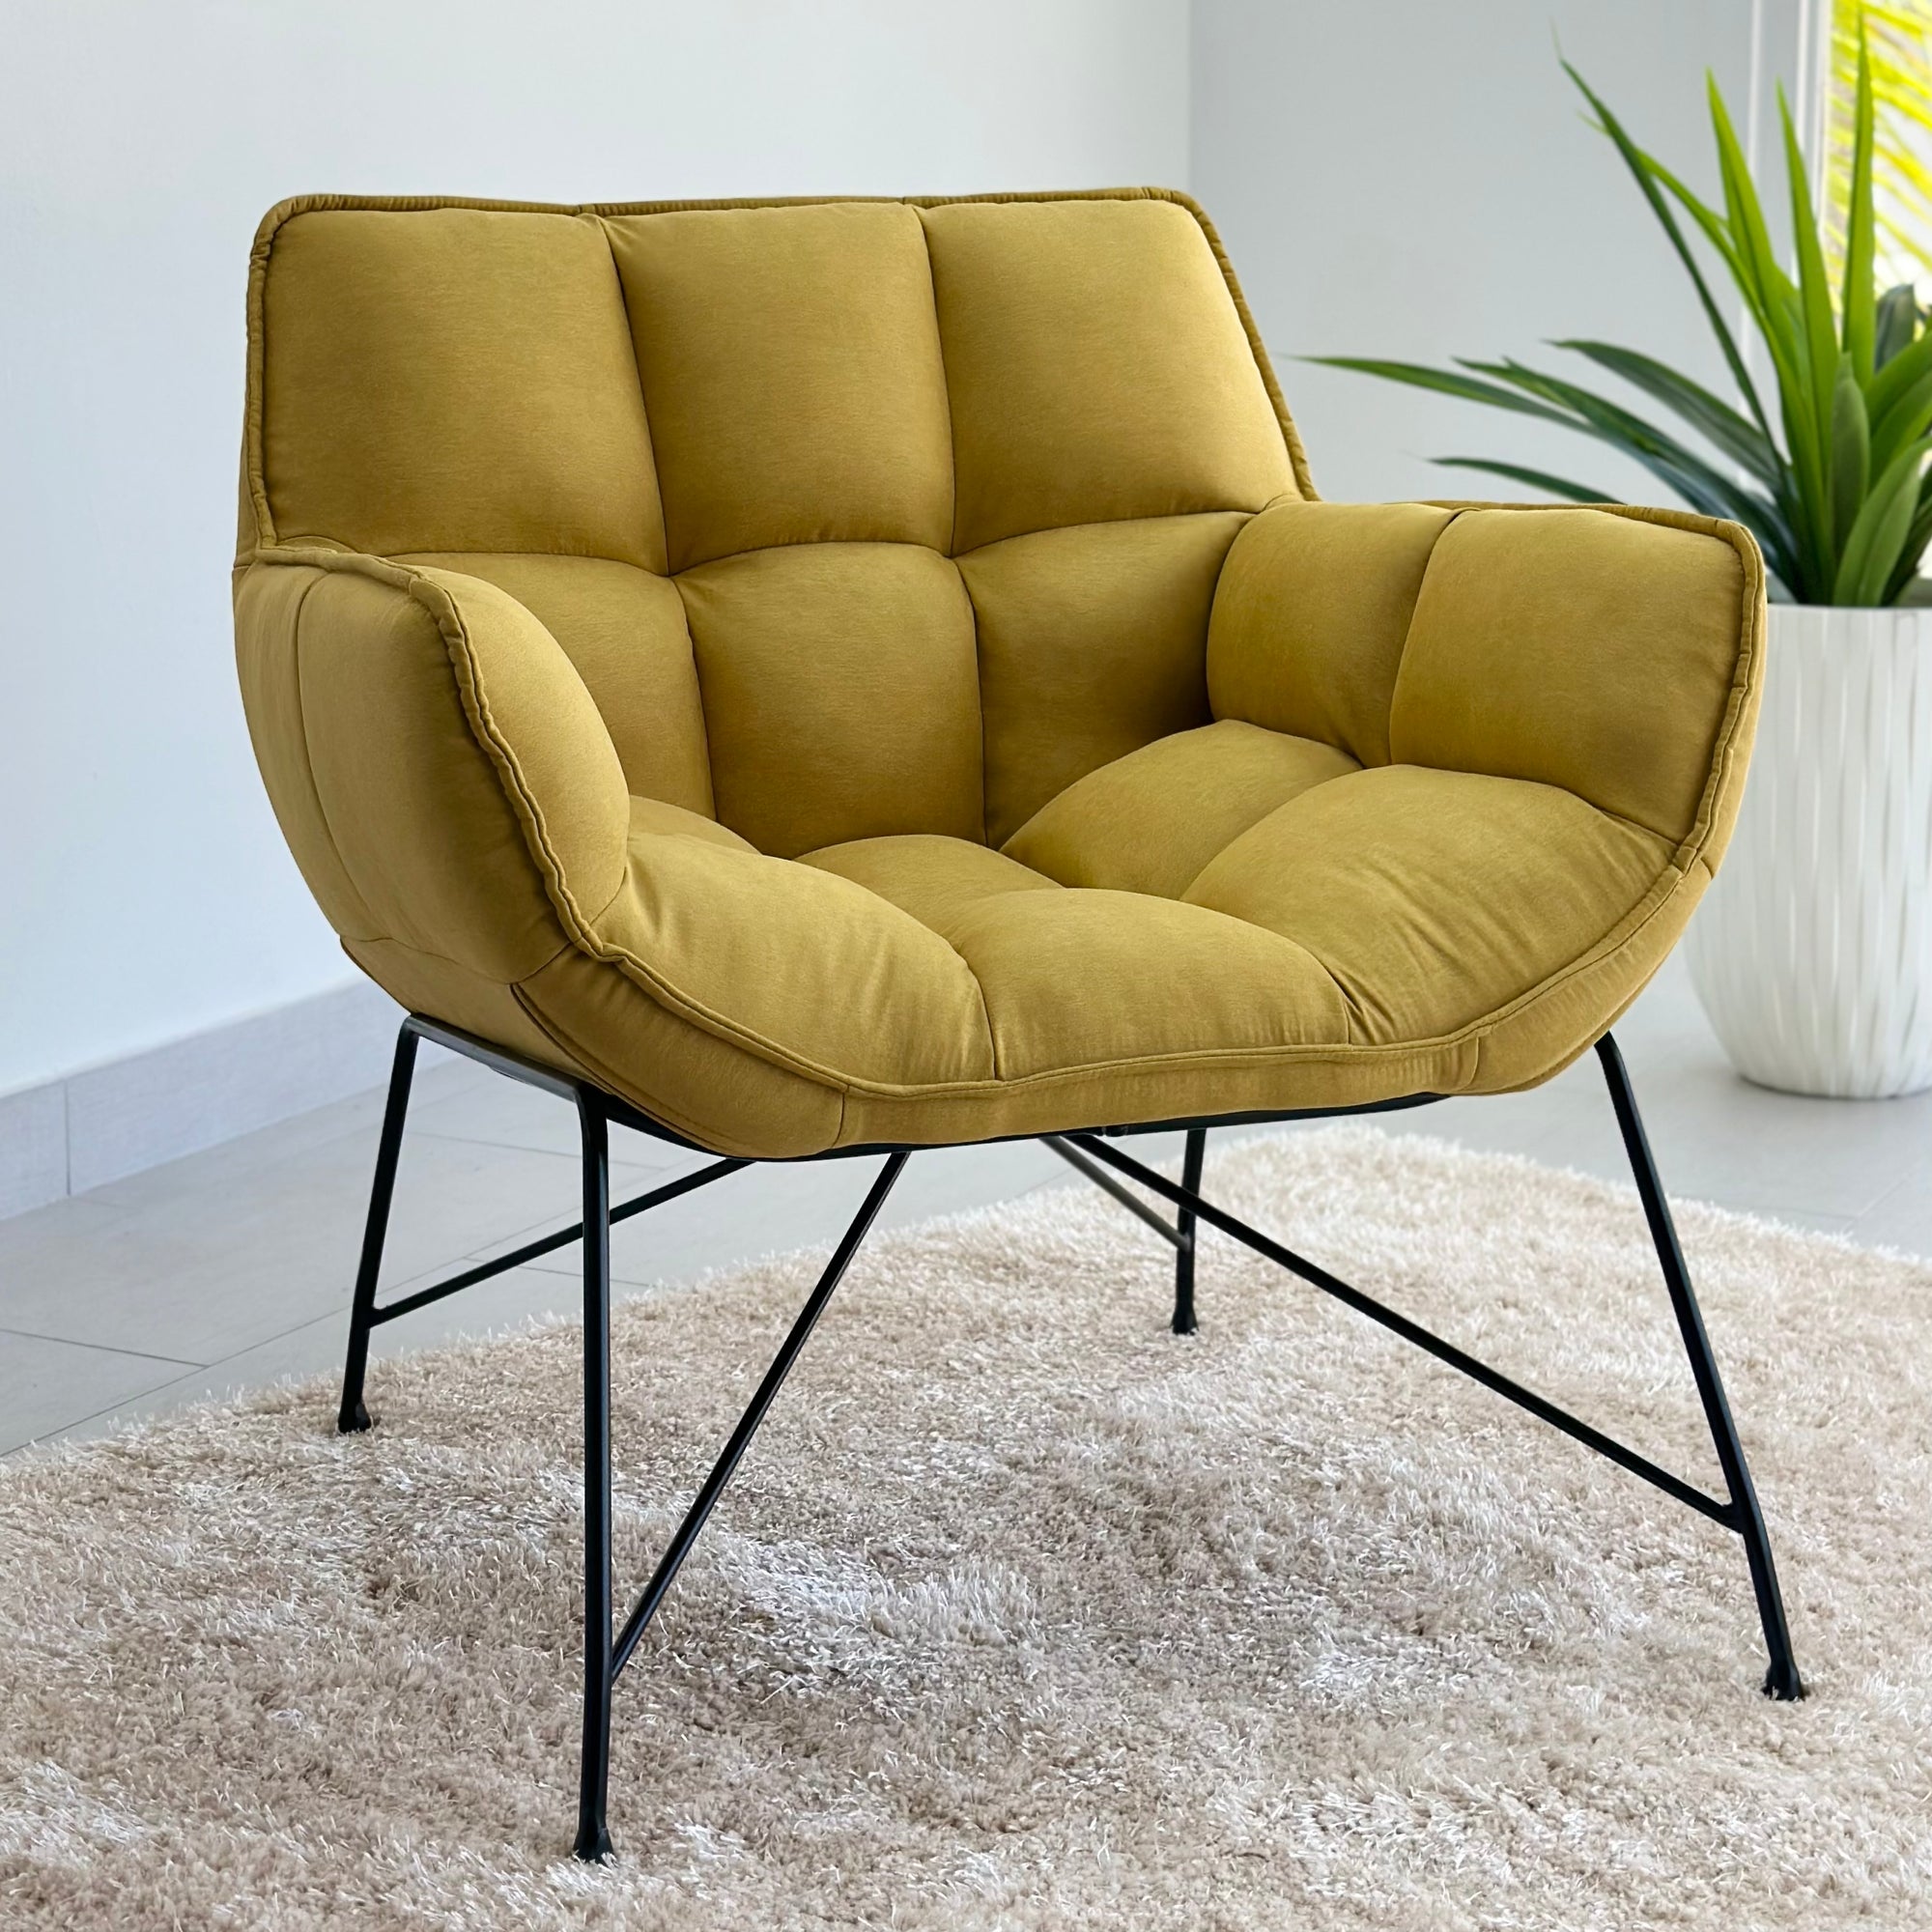 Tufted Ambar Yellow Accent Chair